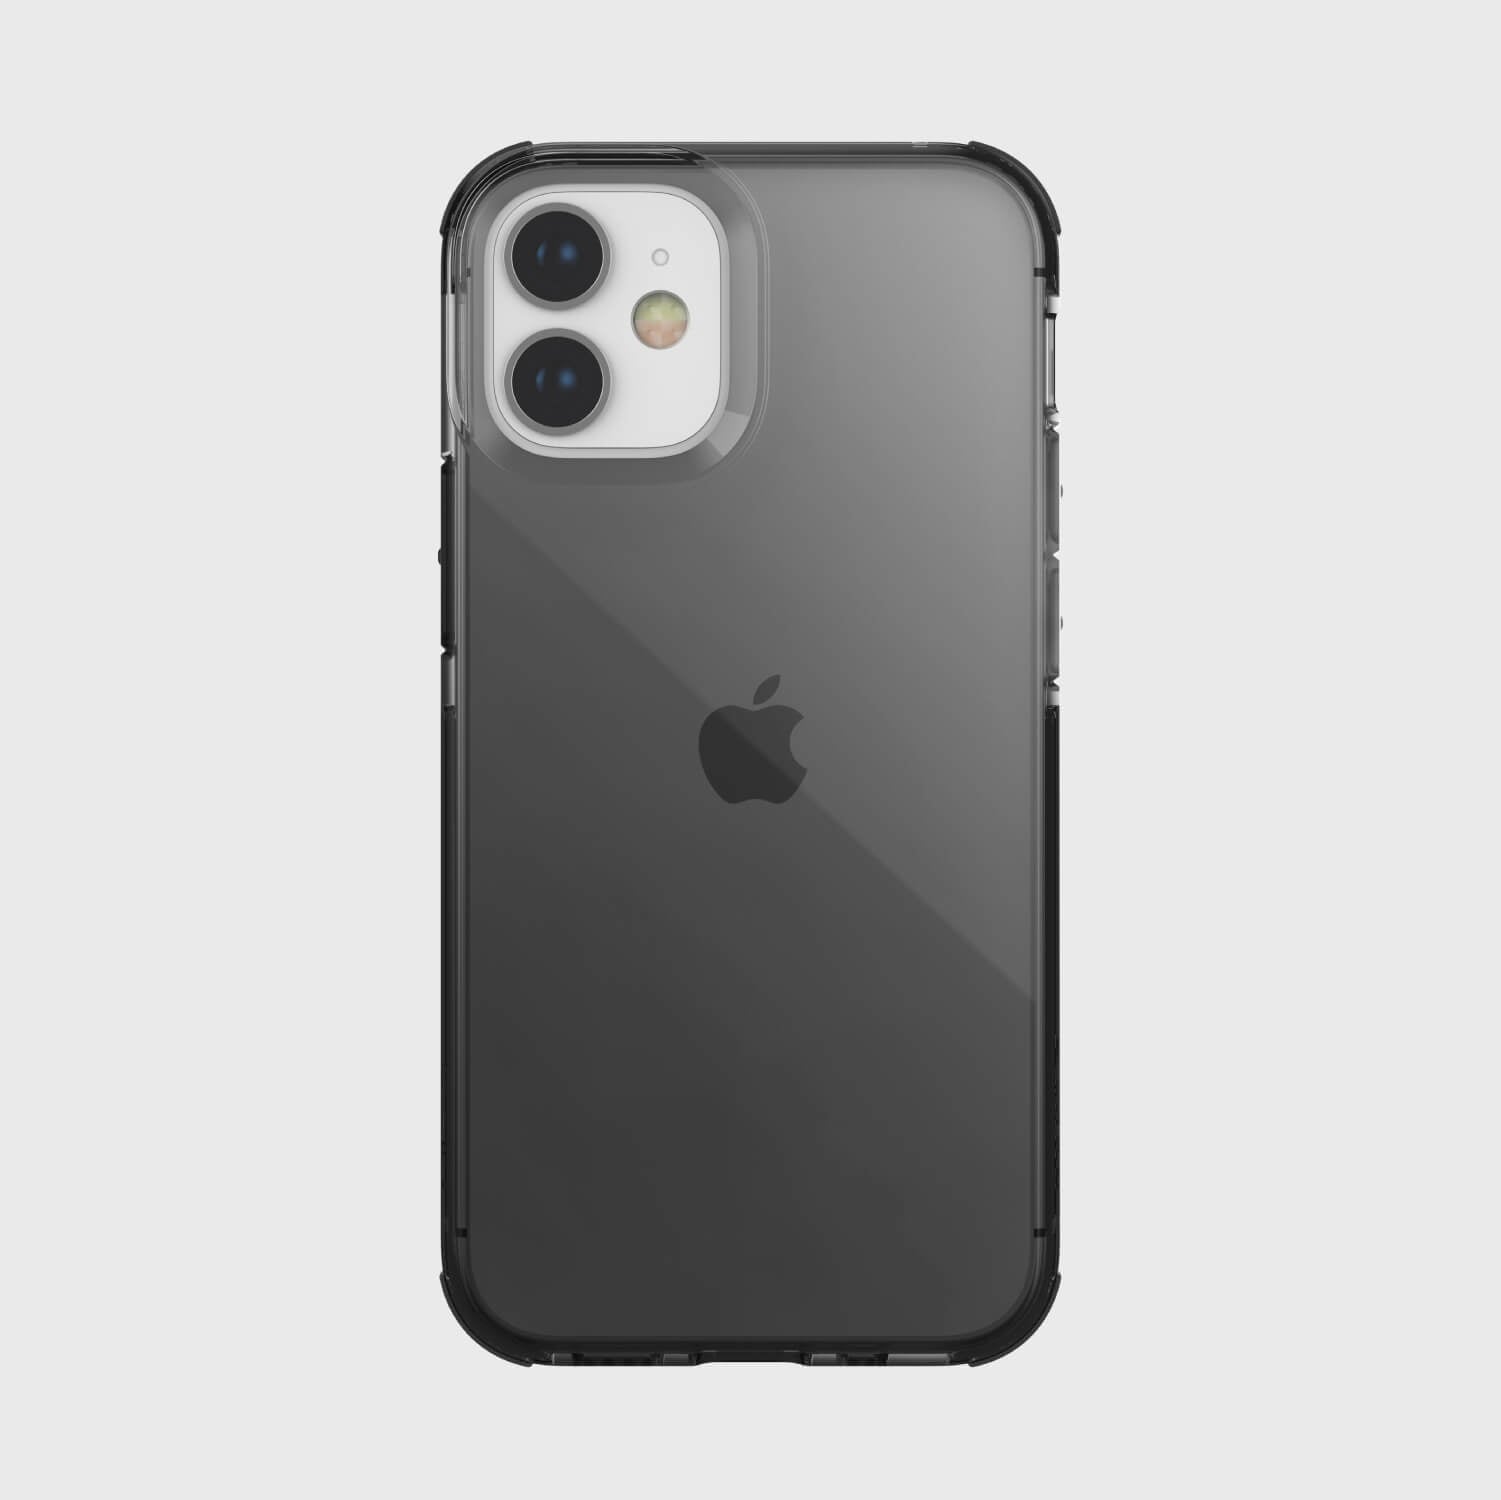 The back view of an iPhone 12 Pro Max Case - CLEAR Raptic case in black, offering drop protection.